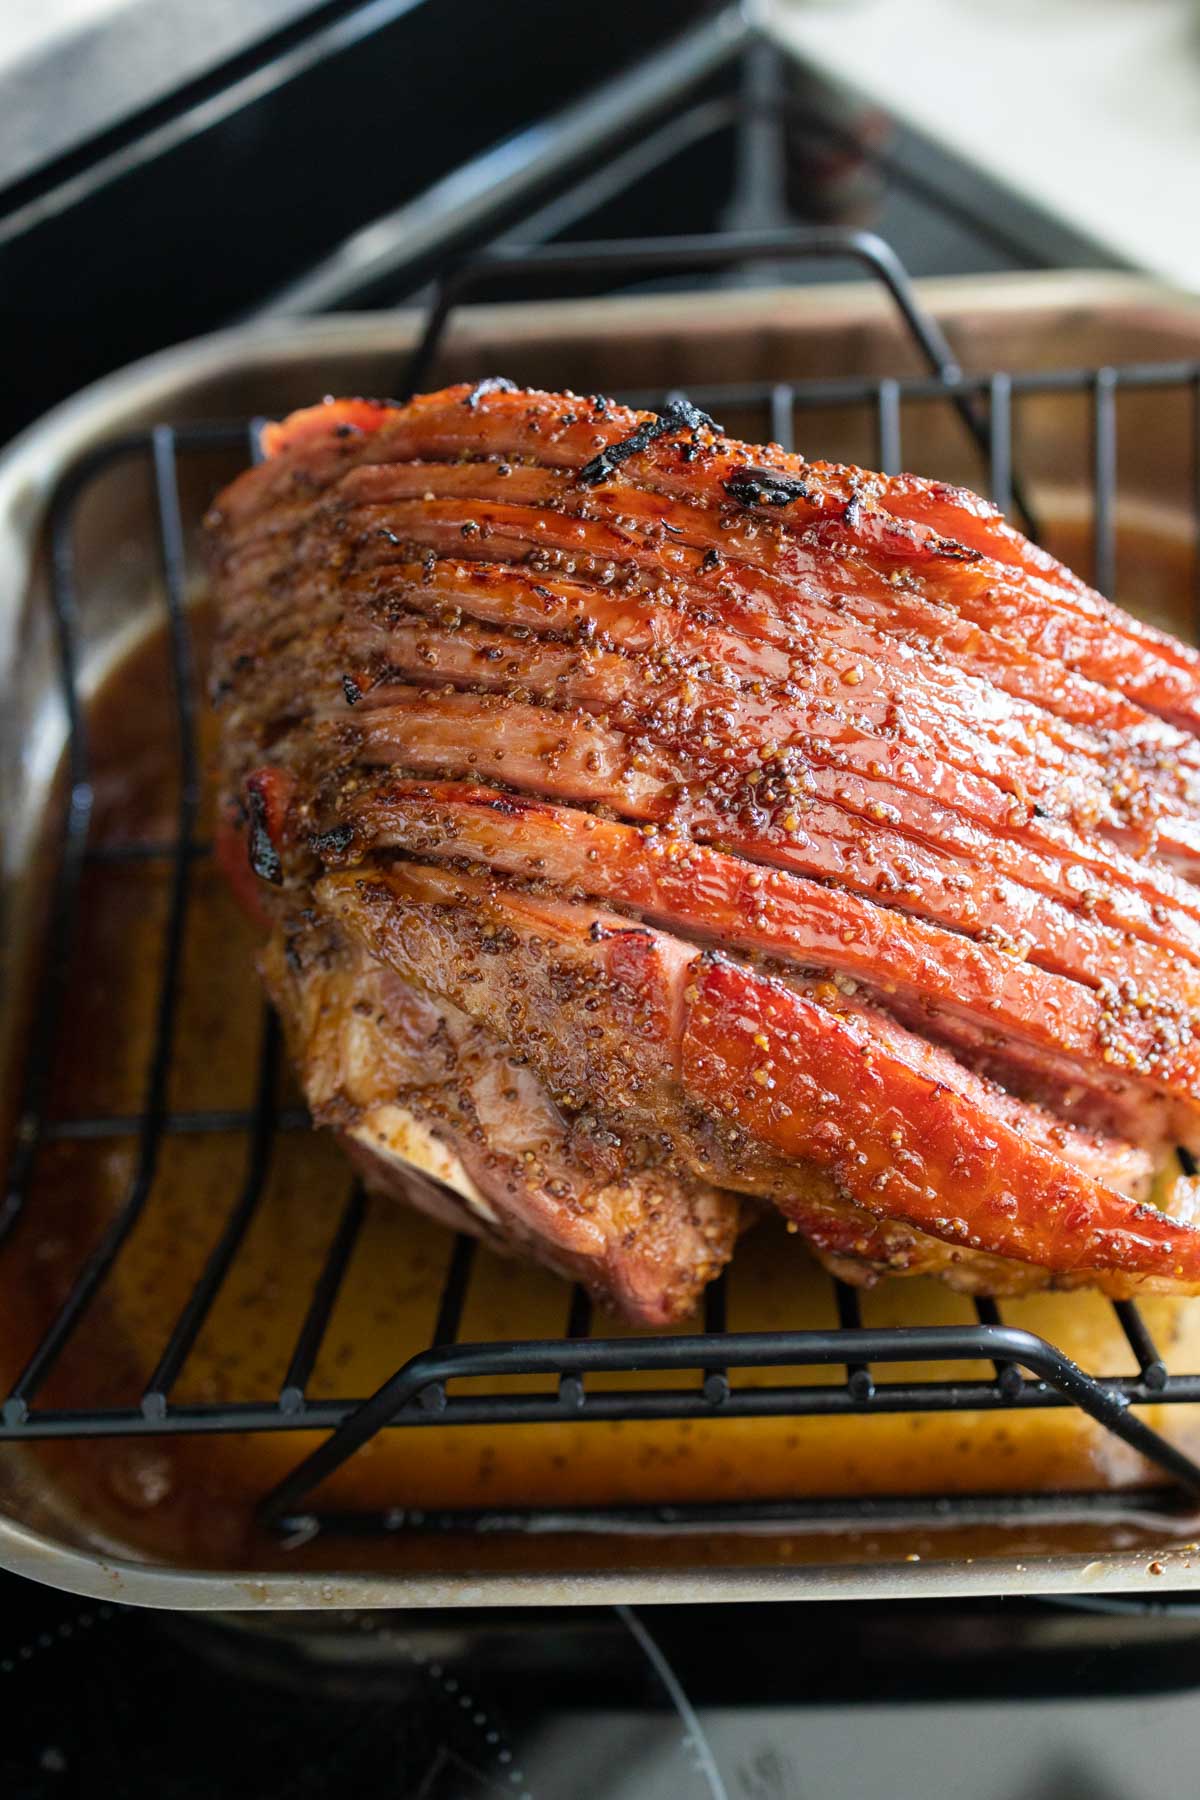 The spiral ham has been brushed with thickened glaze and then broiled for slightly charred crispy edges.